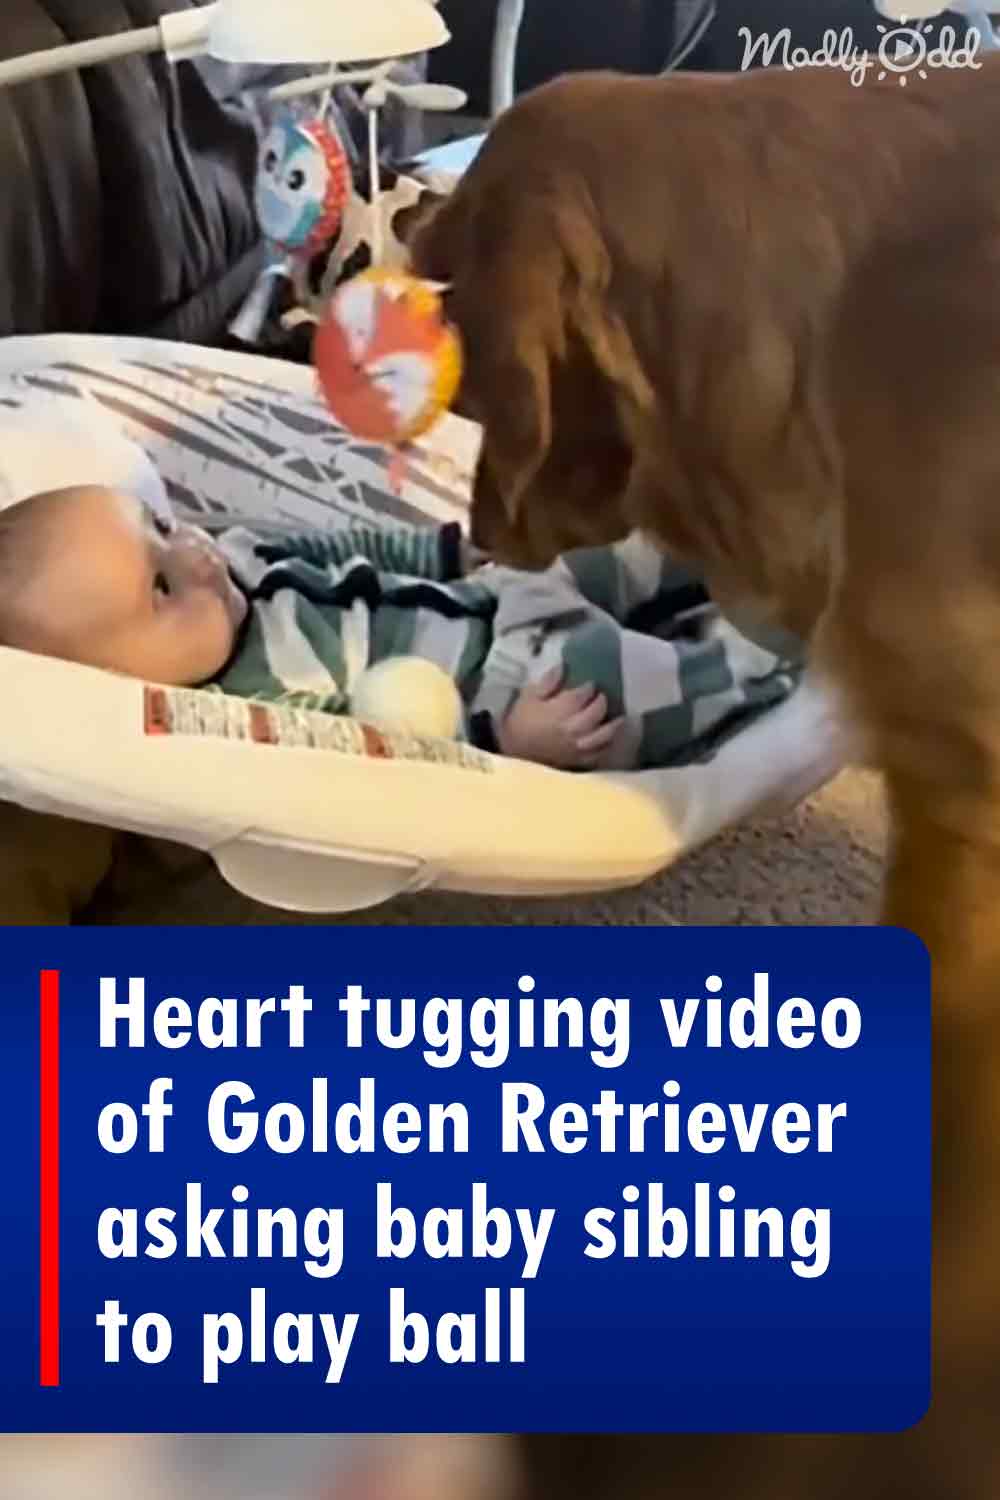 Heart tugging video of Golden Retriever asking baby sibling to play ball